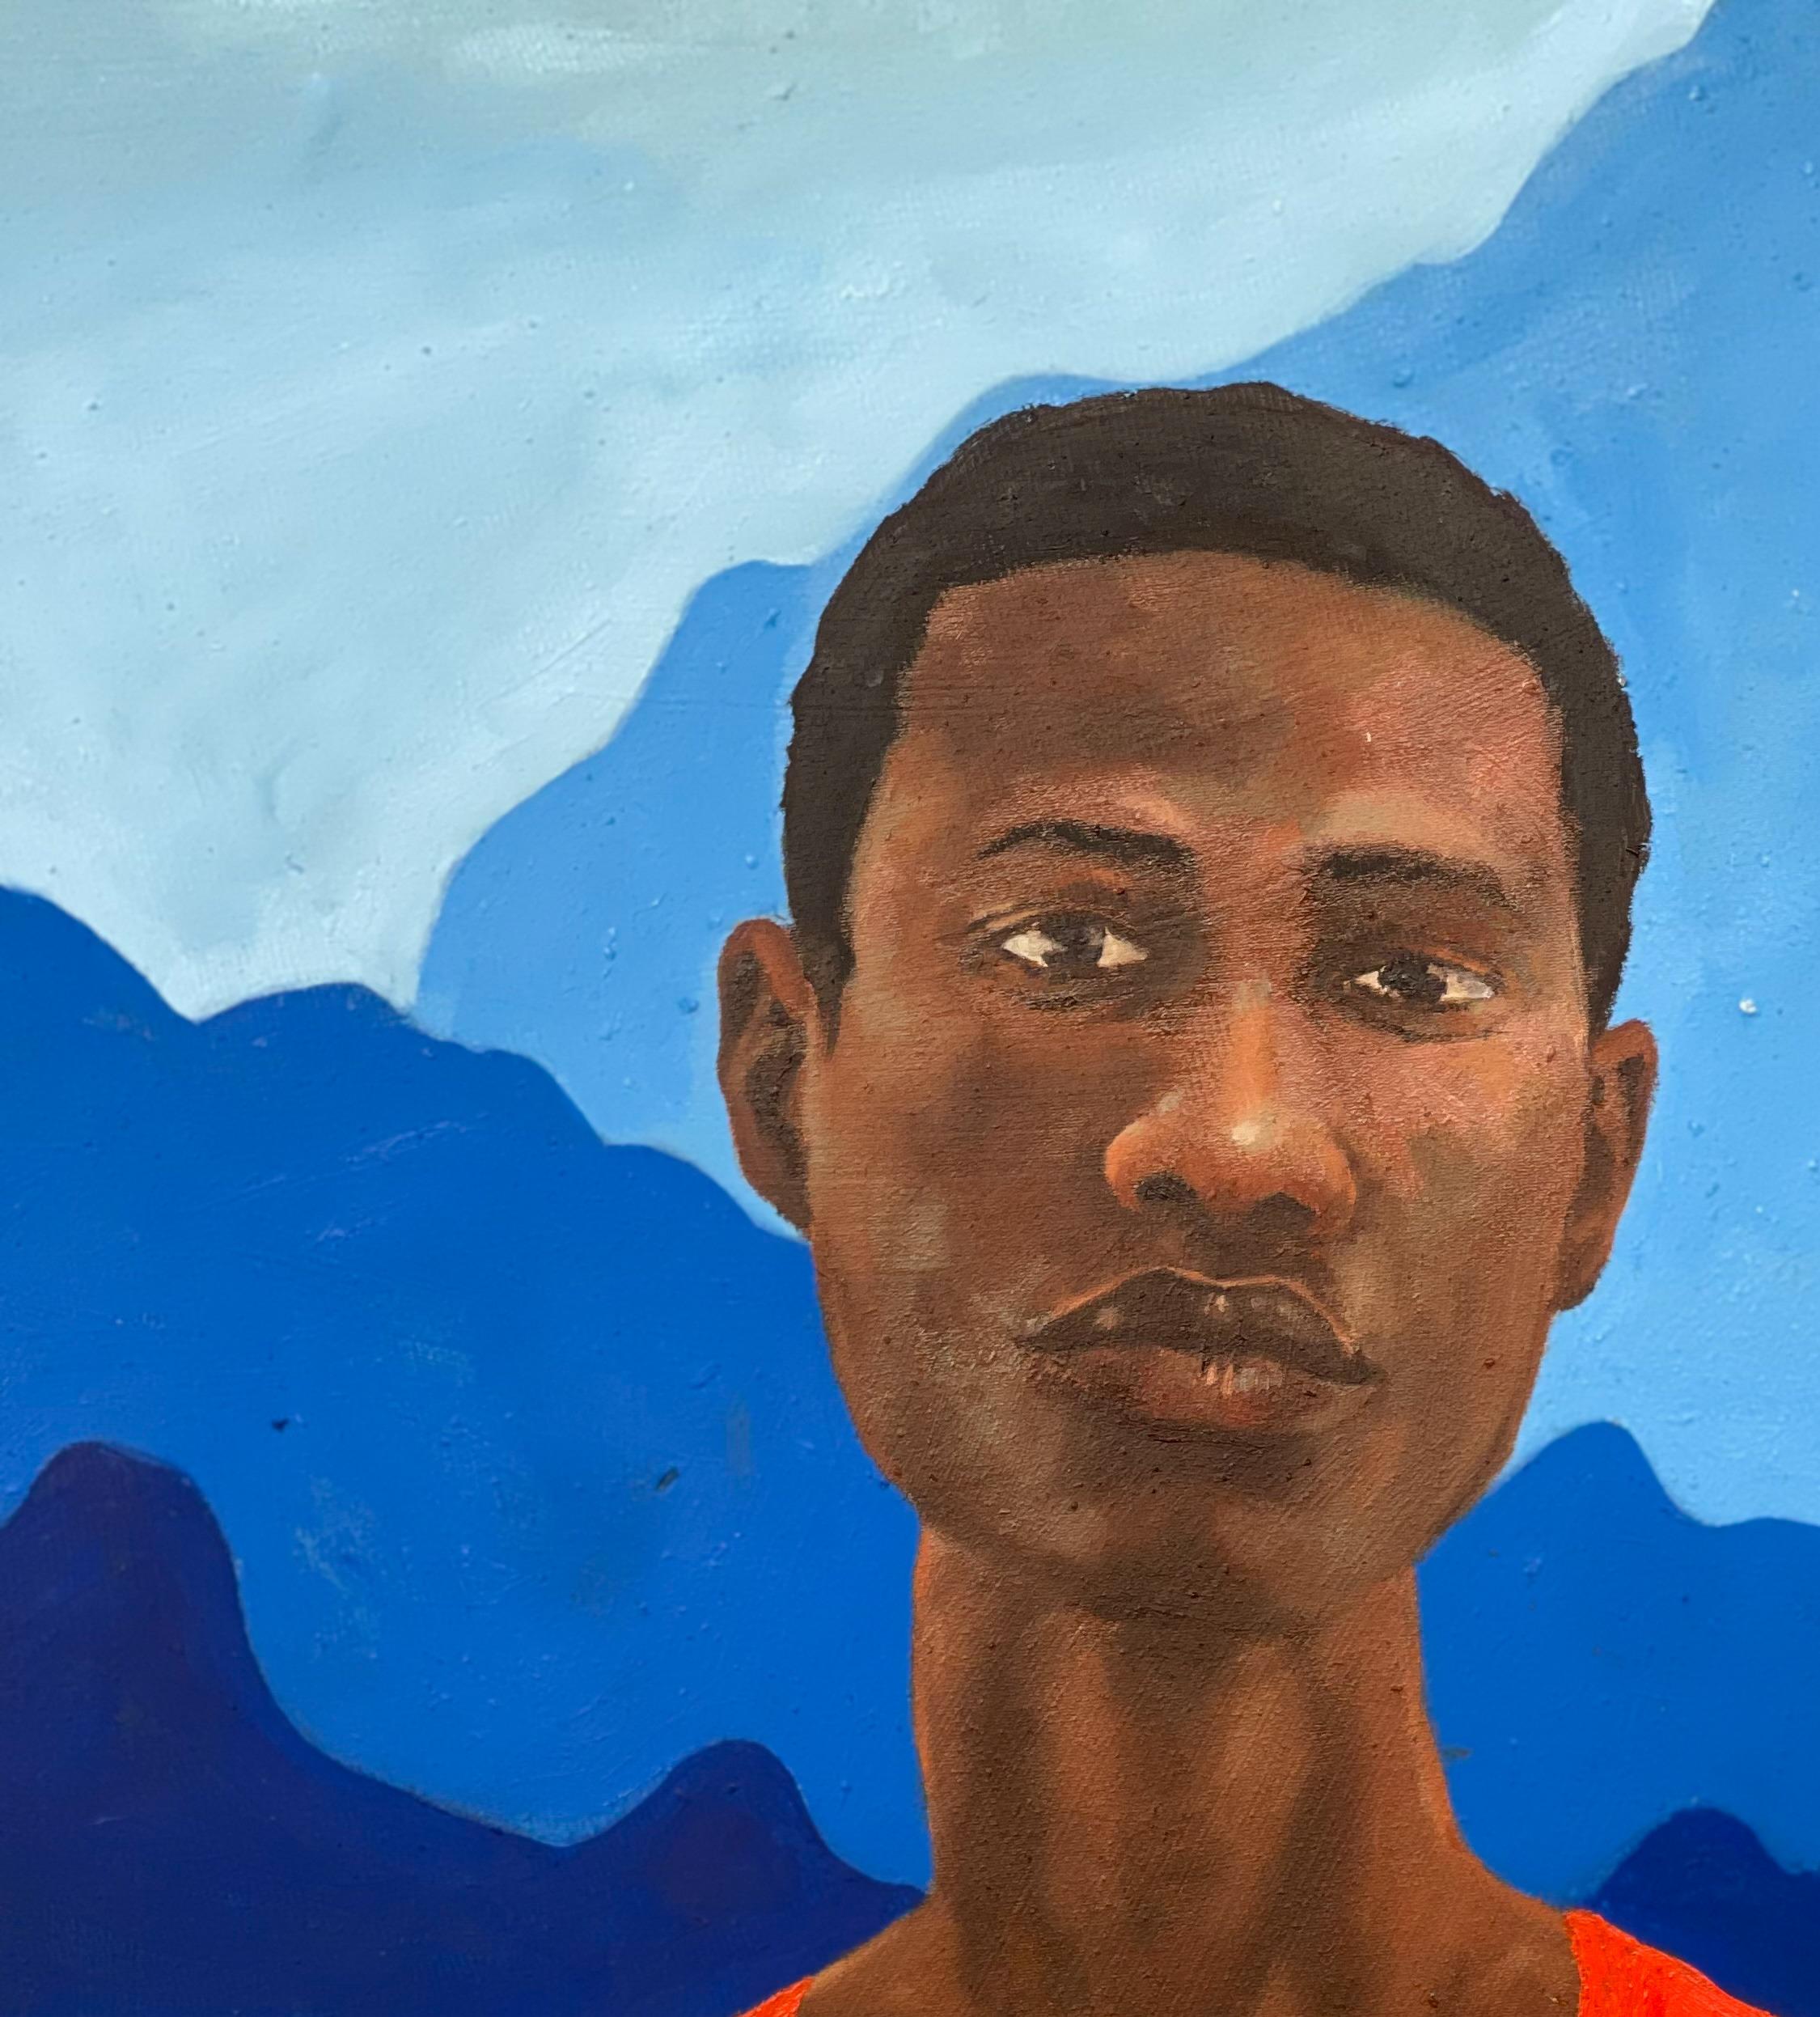 African Boy I - Painting by Faith Gbadero